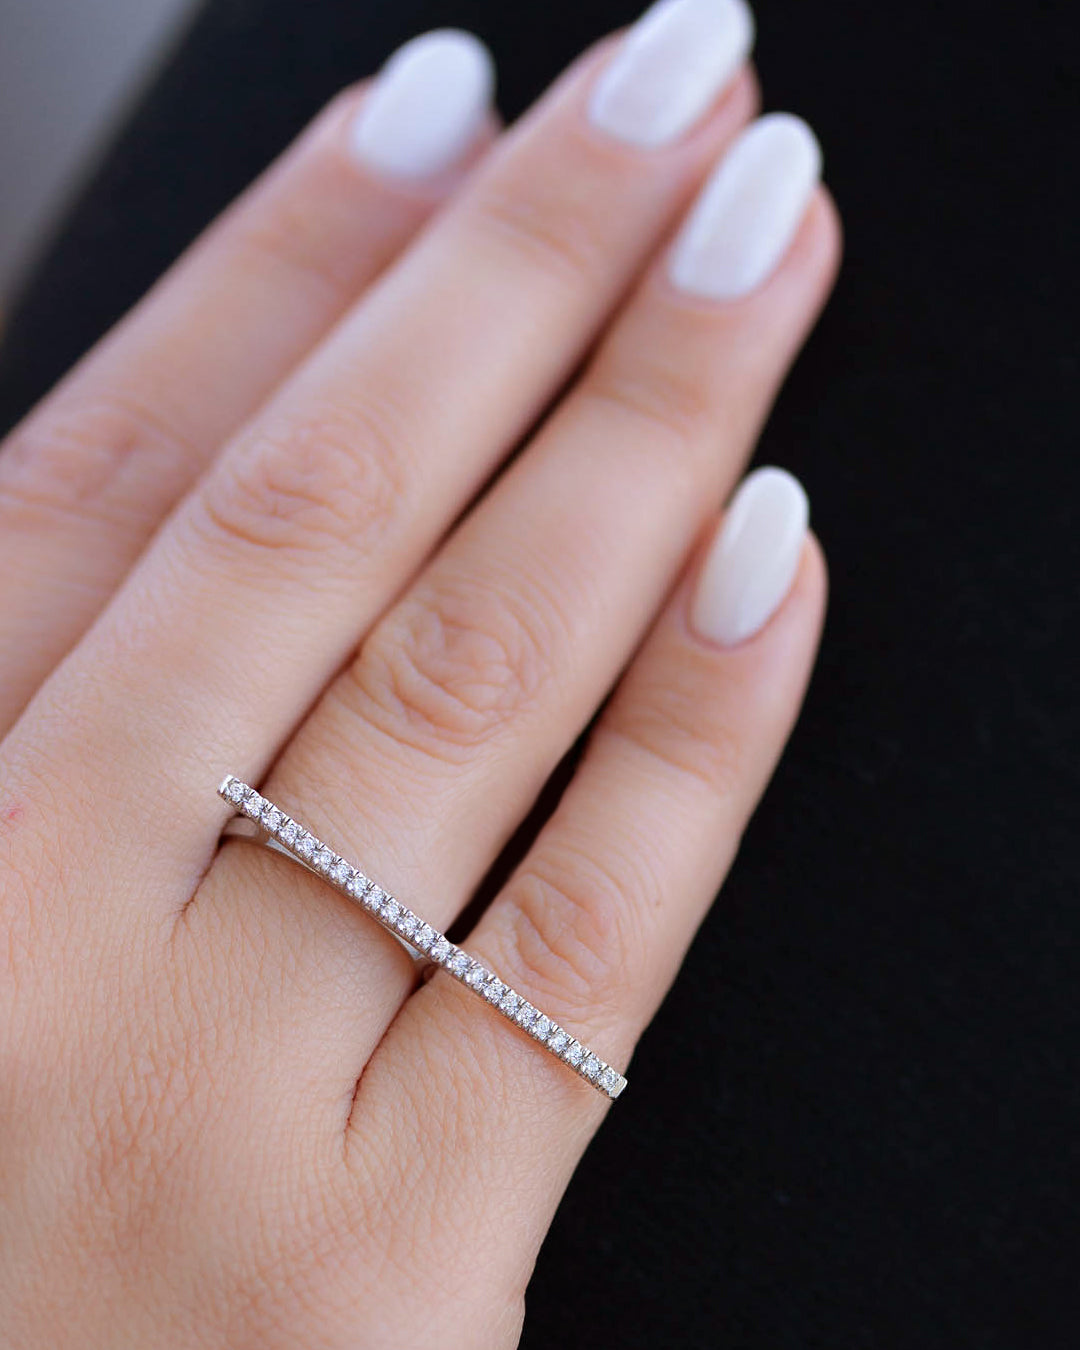 A dainty 14k white gold two finger ring, with a long bar set with white diamonds, that covers both fingers.